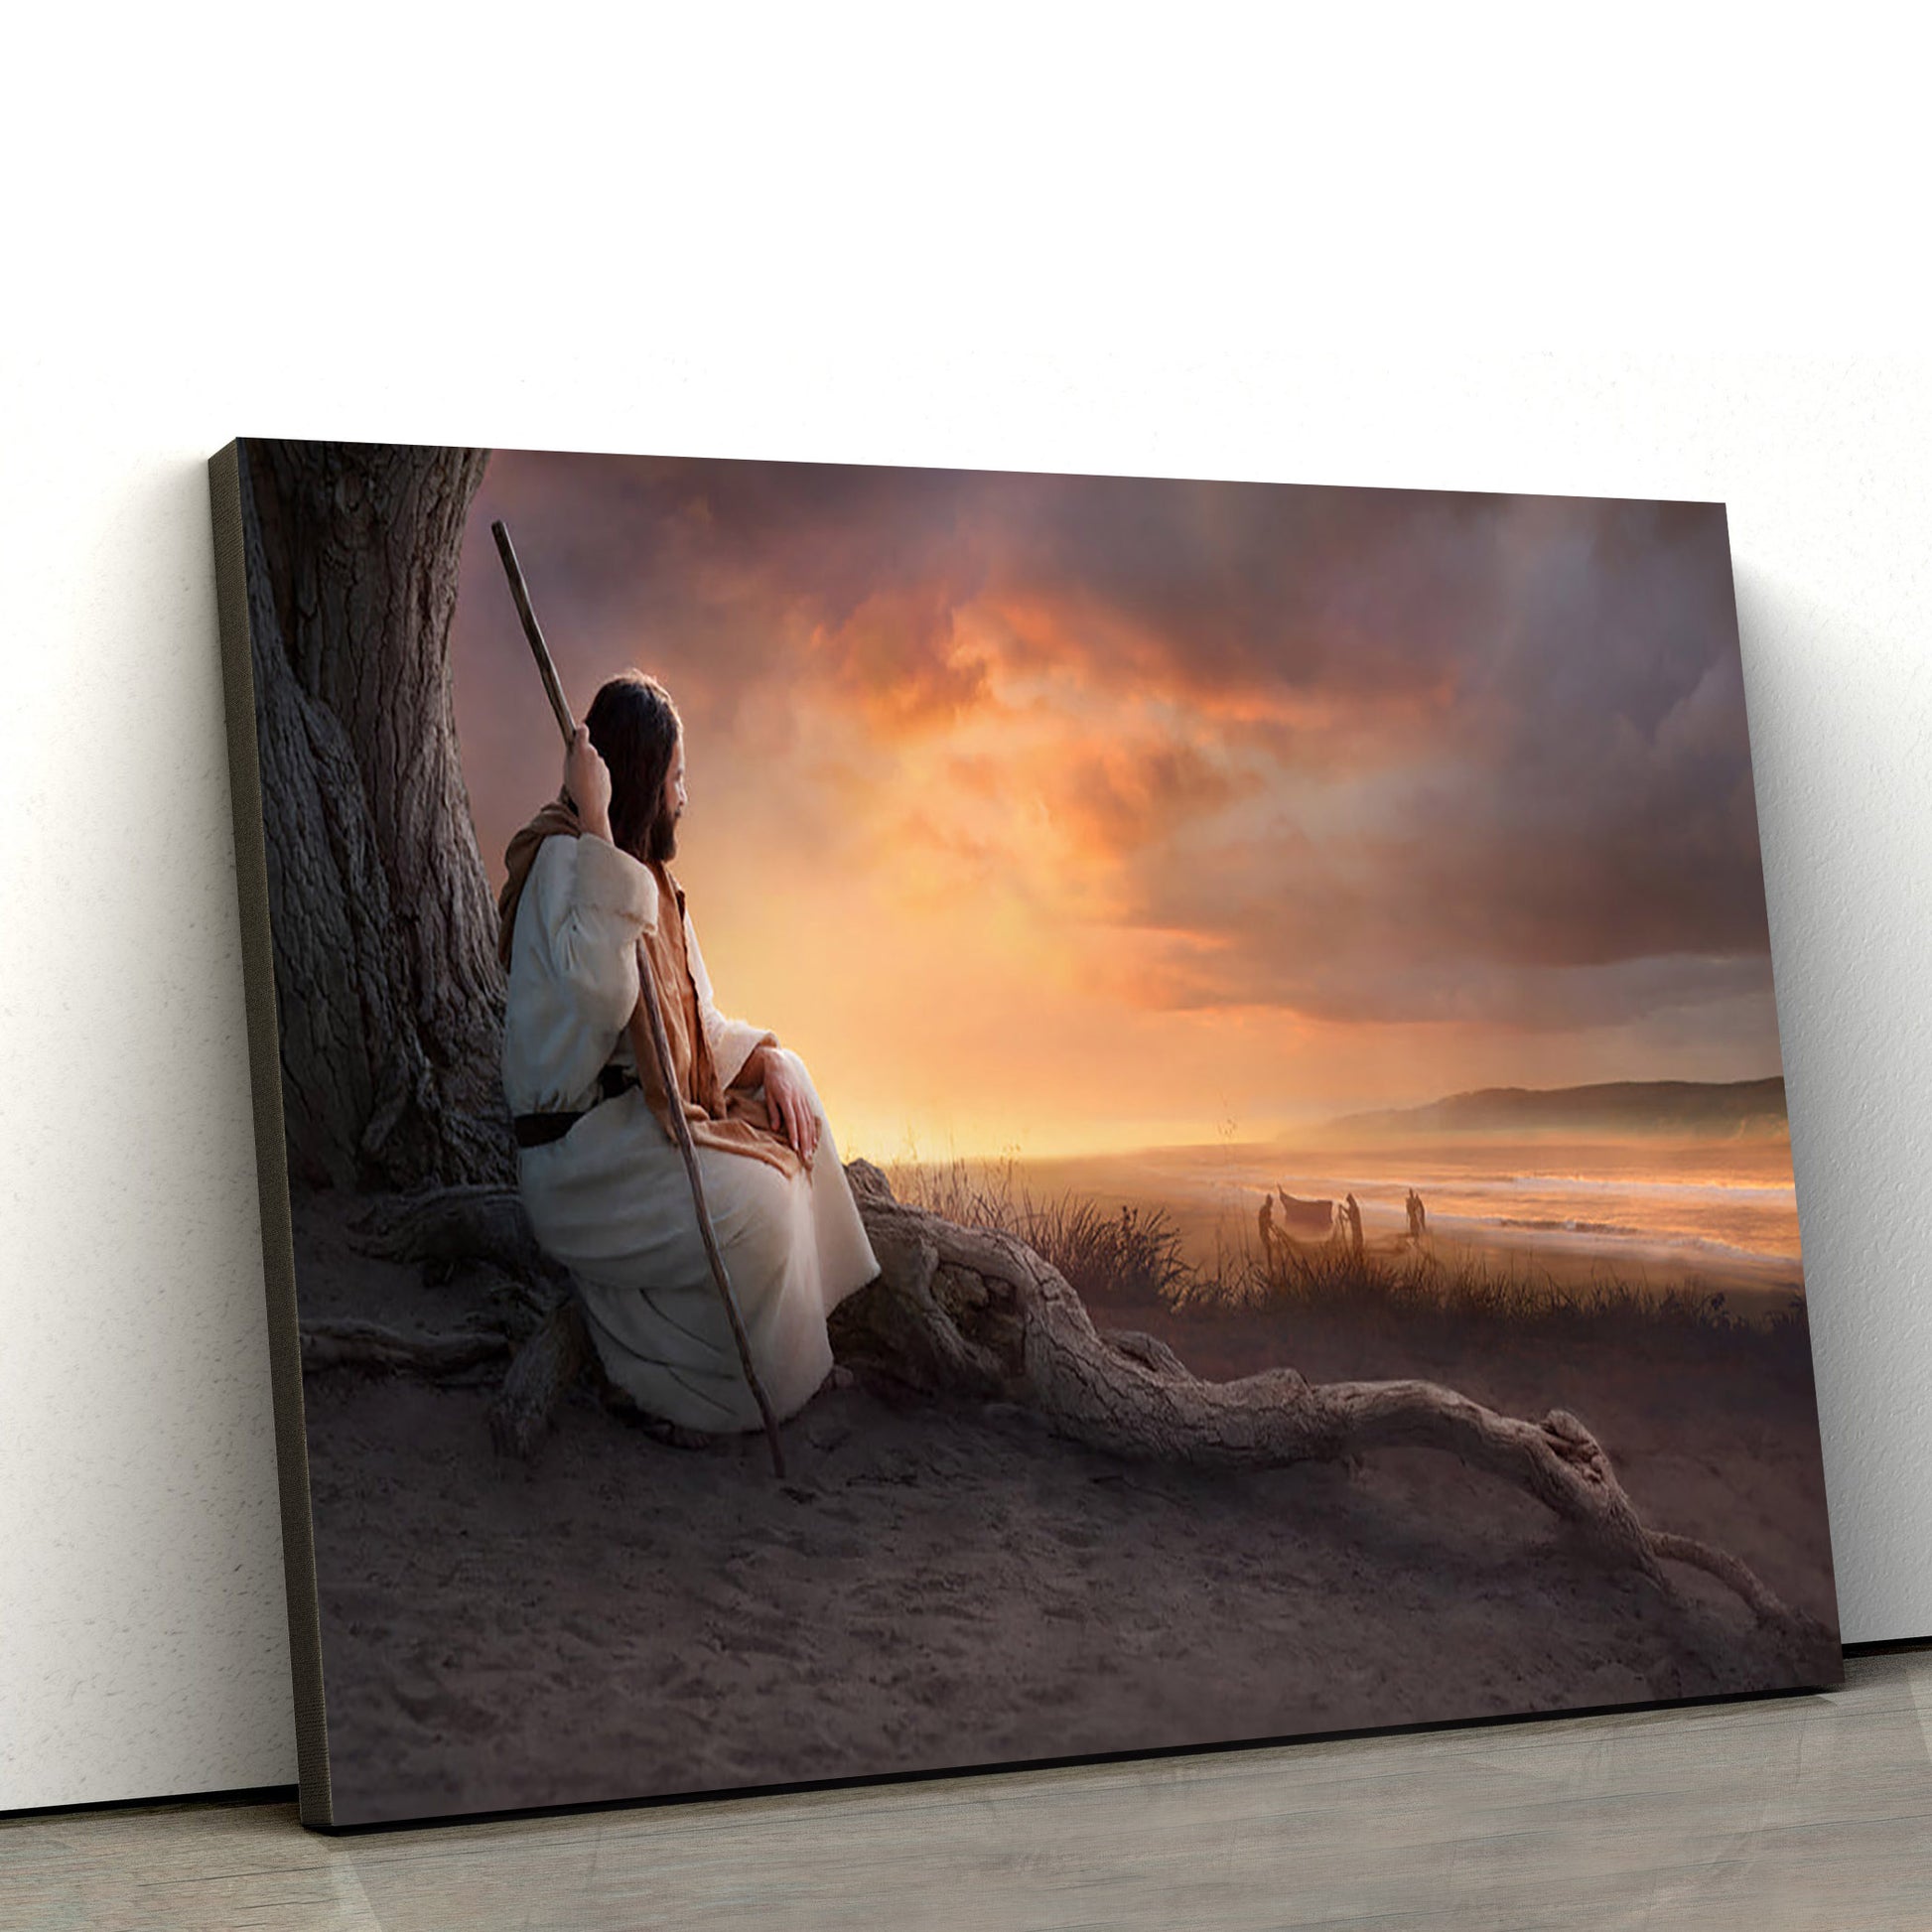 Fisher Of Men Canvas Picture - Jesus Canvas Wall Art - Christian Wall Art